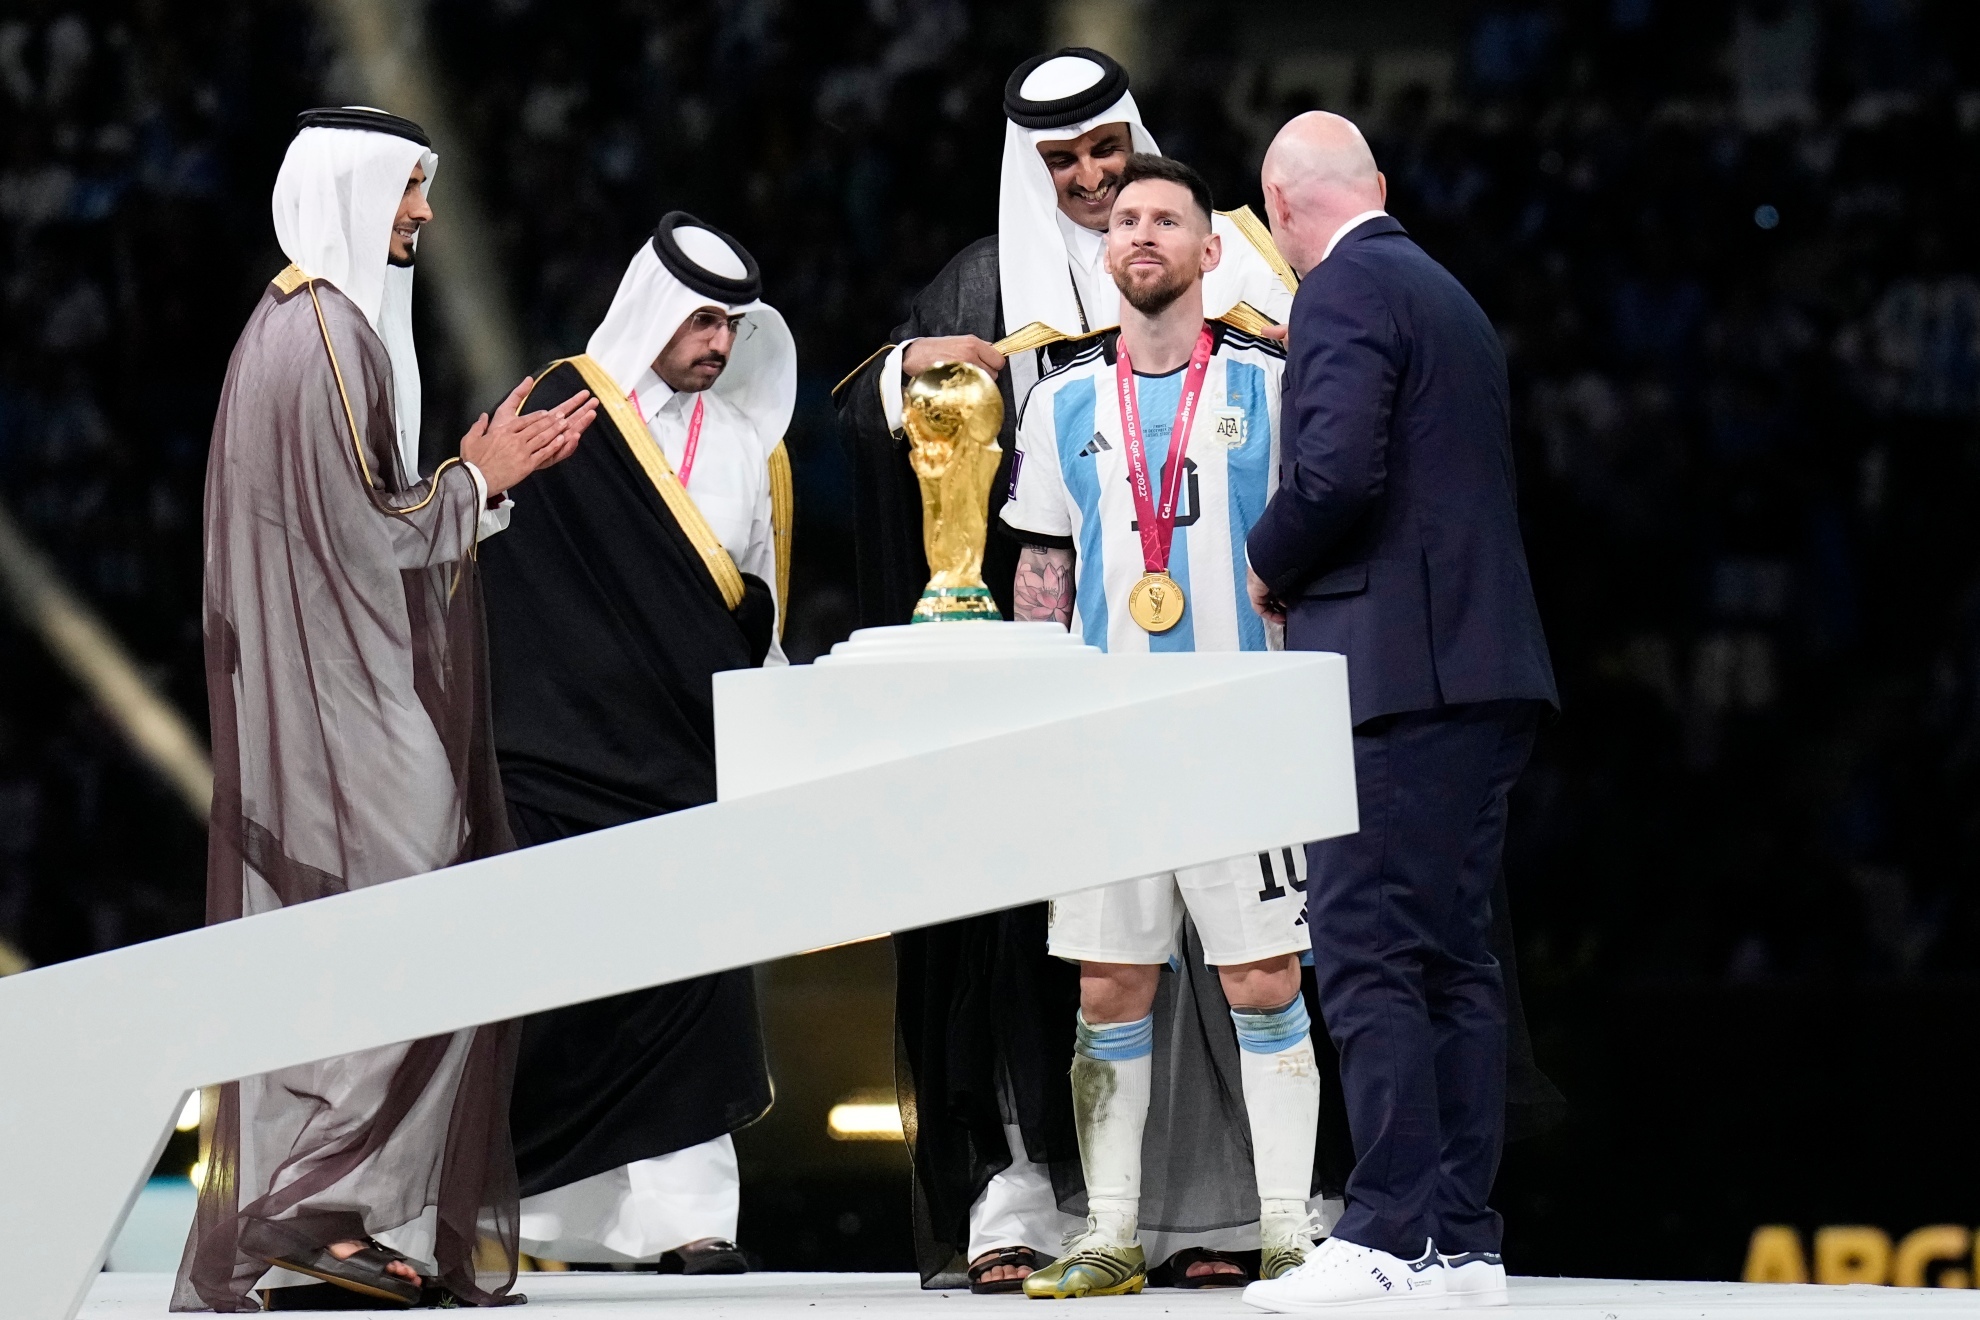 Lionel Messi getting the Bisht from the Emir of Qatar